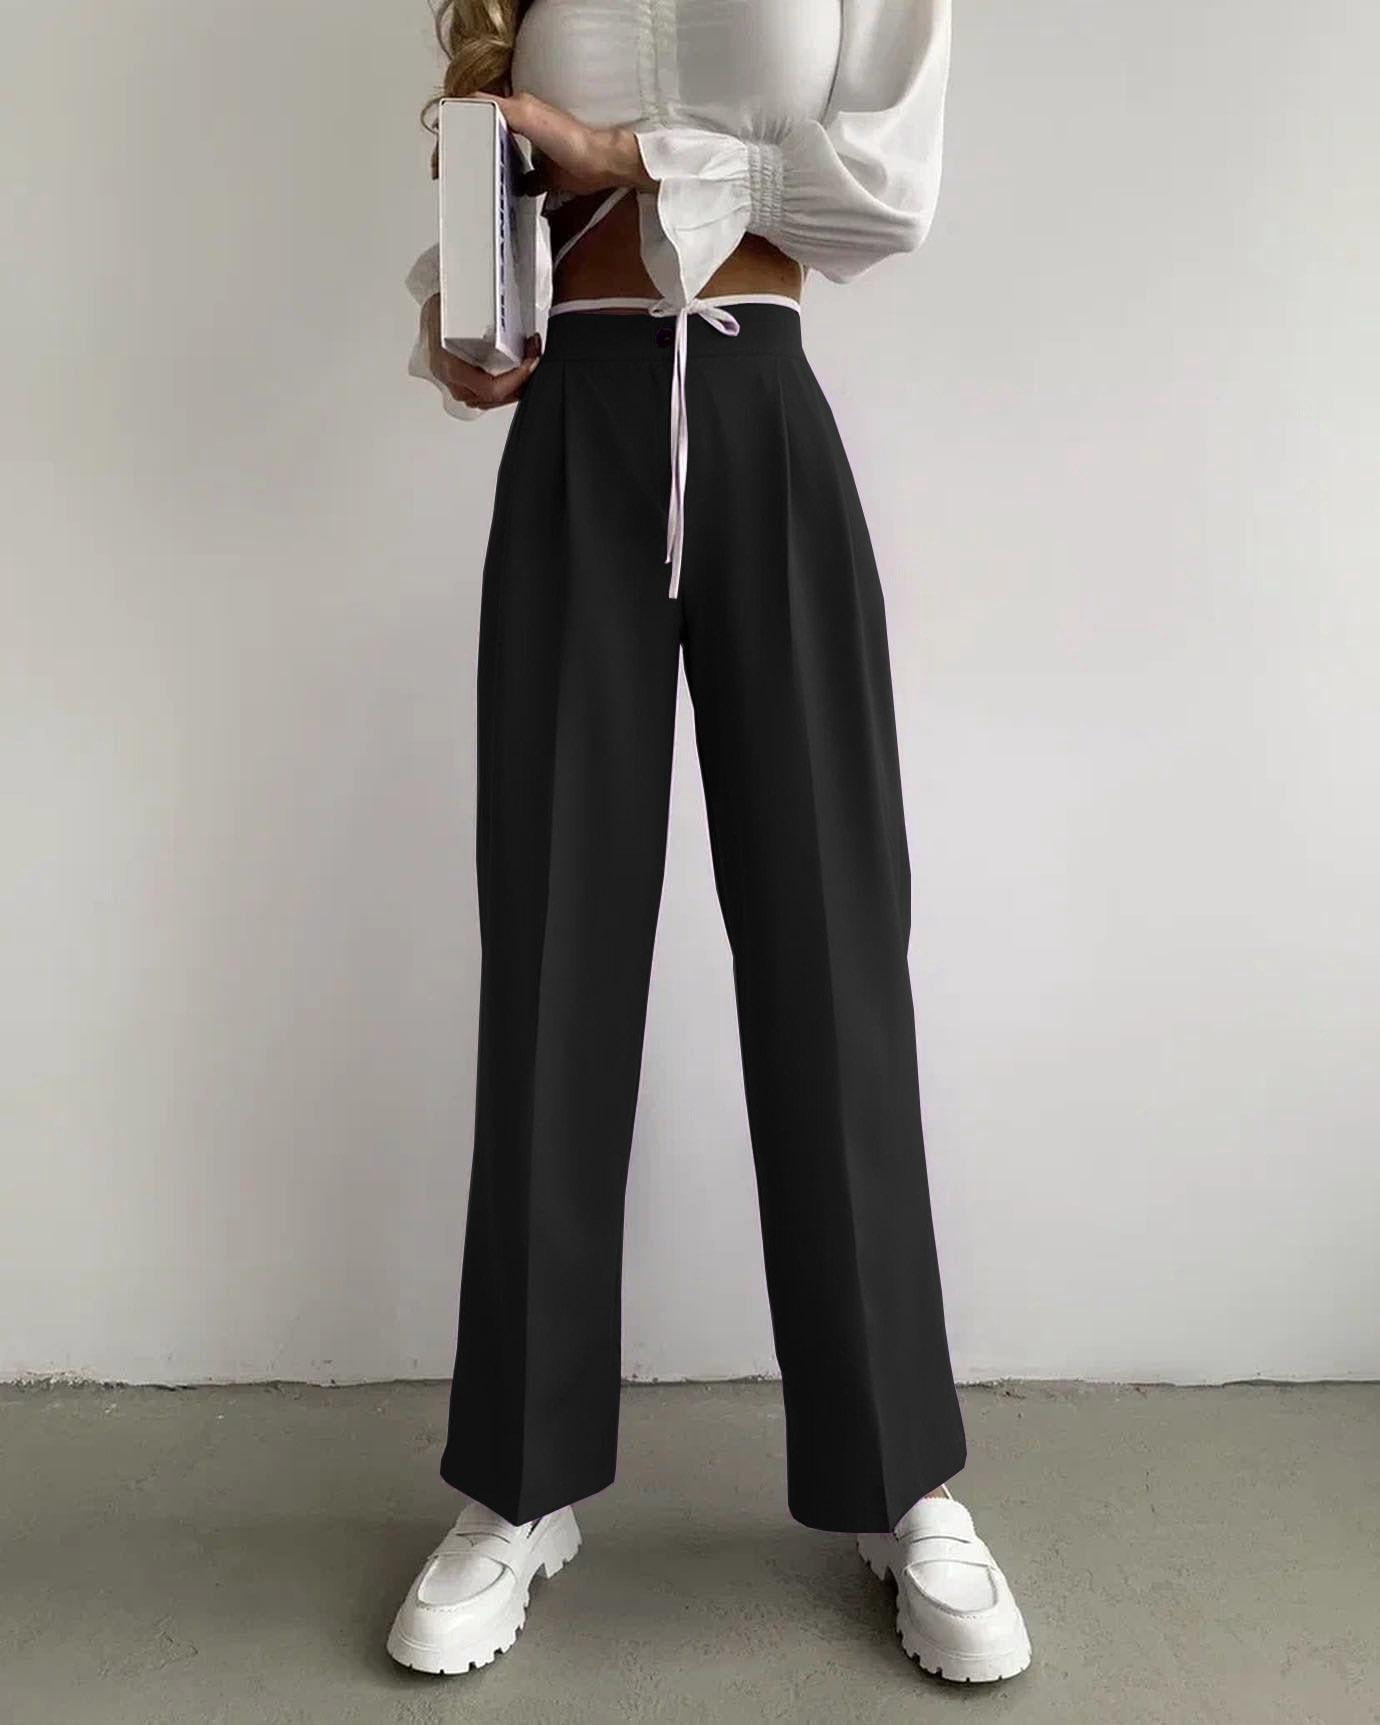 Ethnic High Waist Women Straight Casual Other Polyester Holiday Ankle-Length  Pants Zip All-Season Elastic Waist Pants 